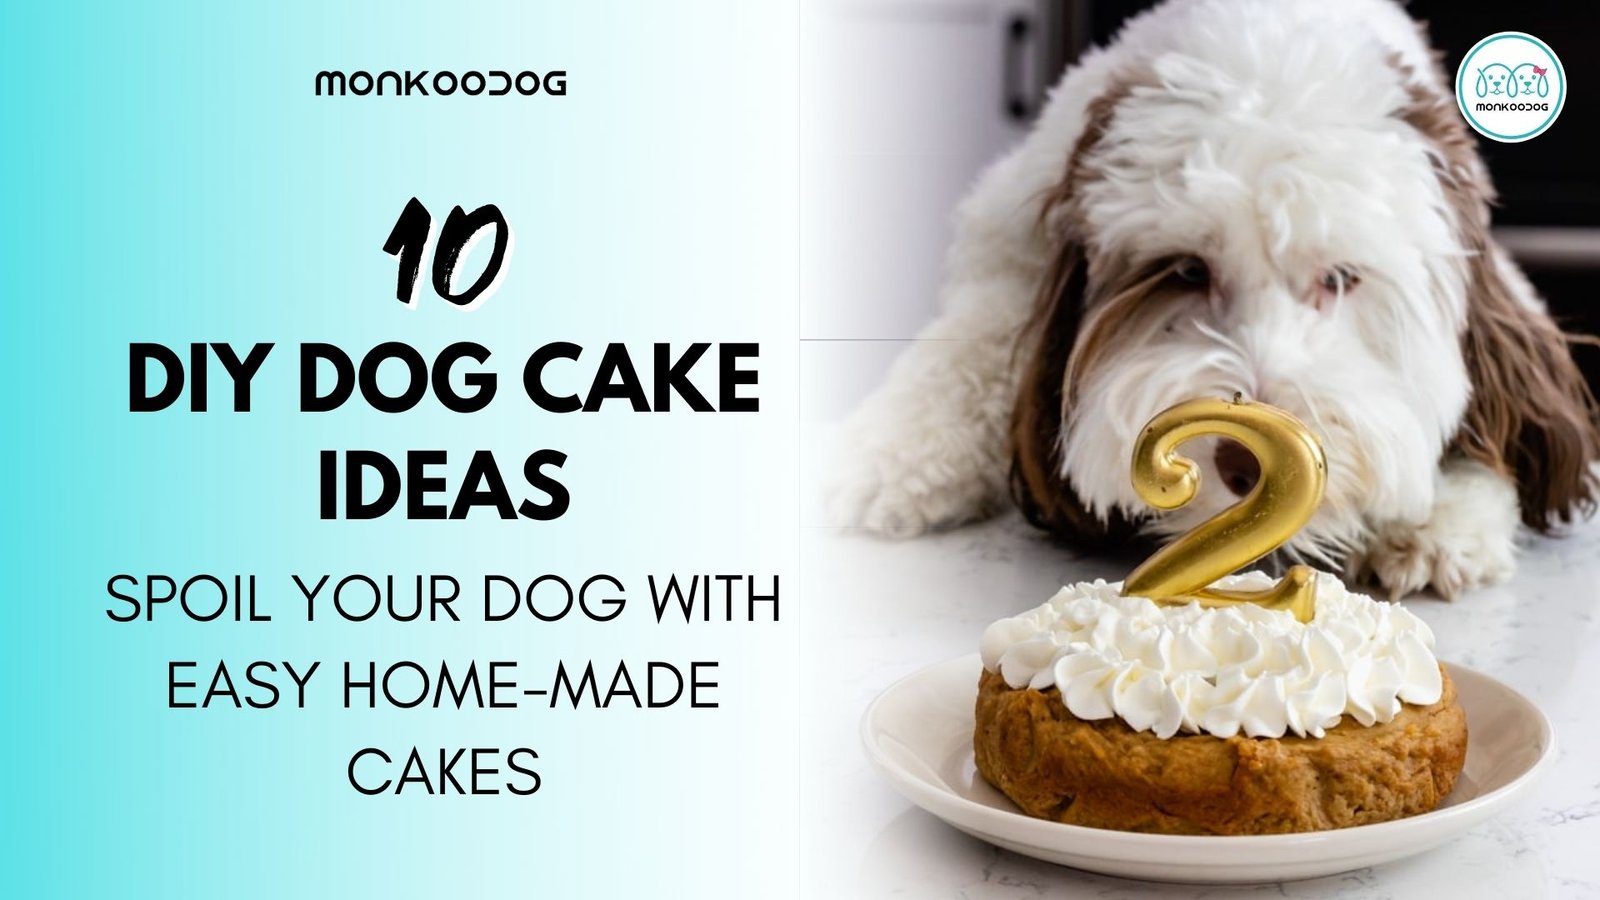 Top 7 Diy Dog Cake Ideas That You Can Try At Home Monkoodog